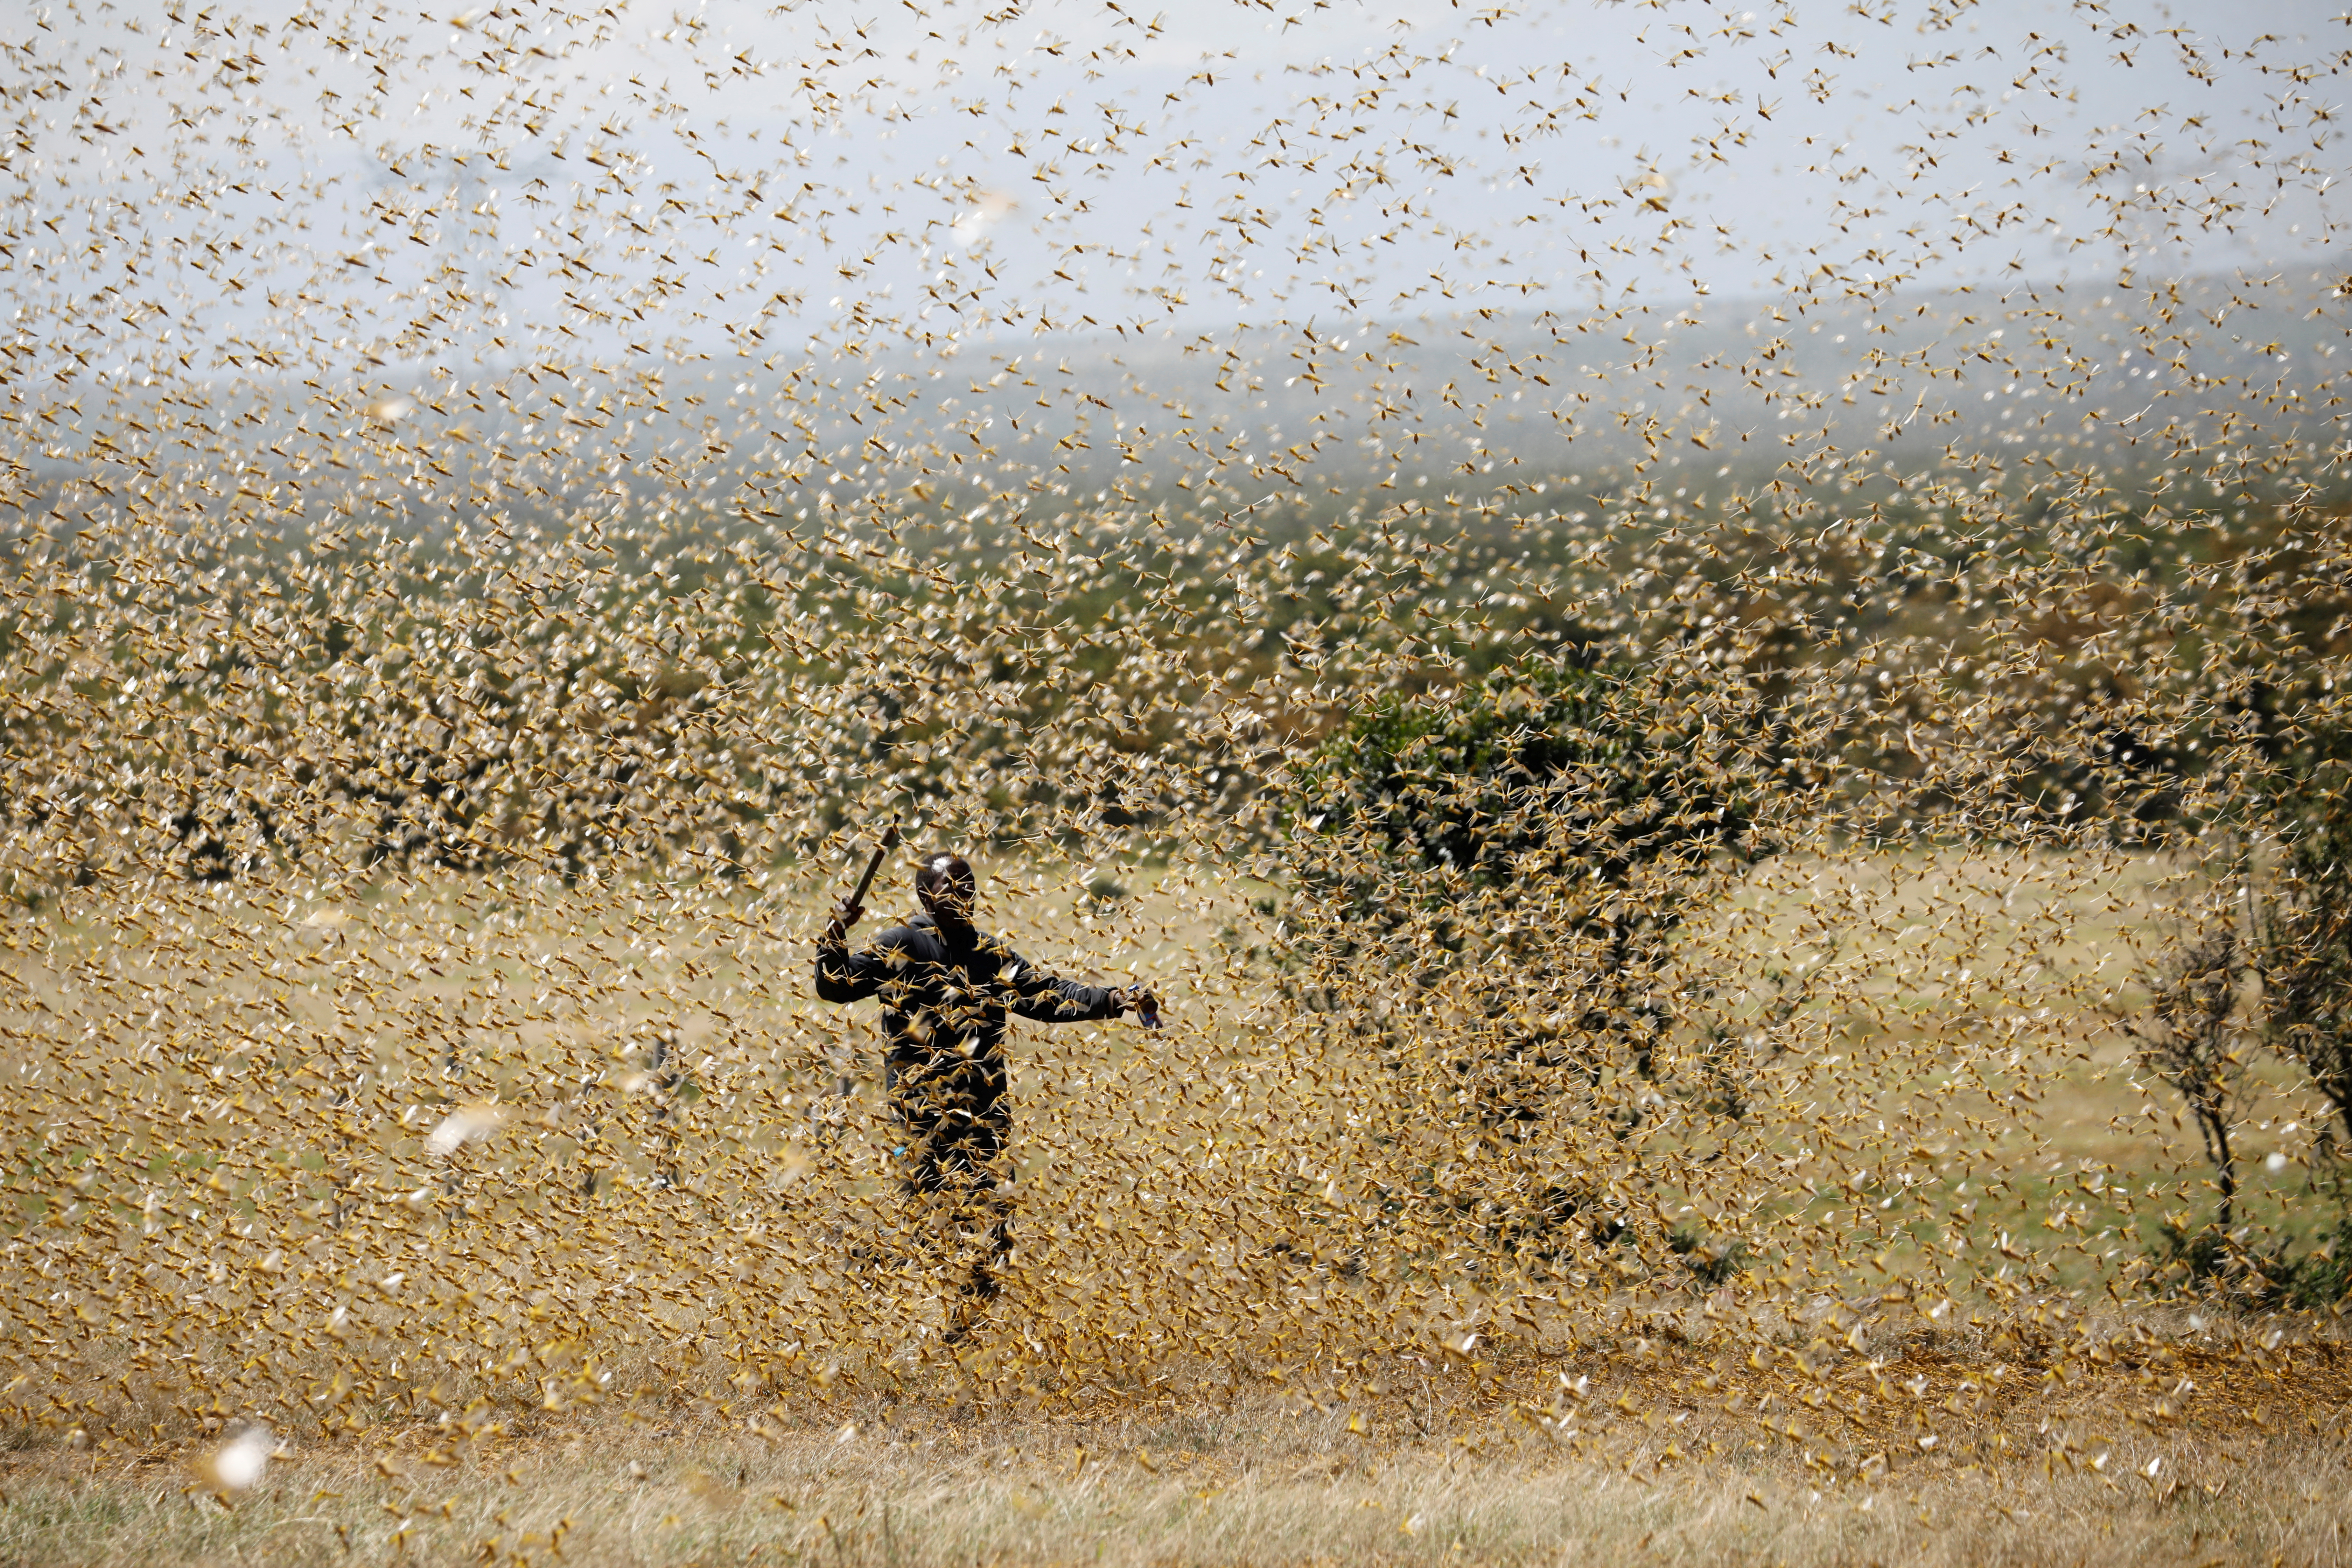 A man attempts to fend-off a swarm of desert locusts at a ranch near the town of Nanyuki in Laikipia county, Kenya, Feb. 21, 2020. 